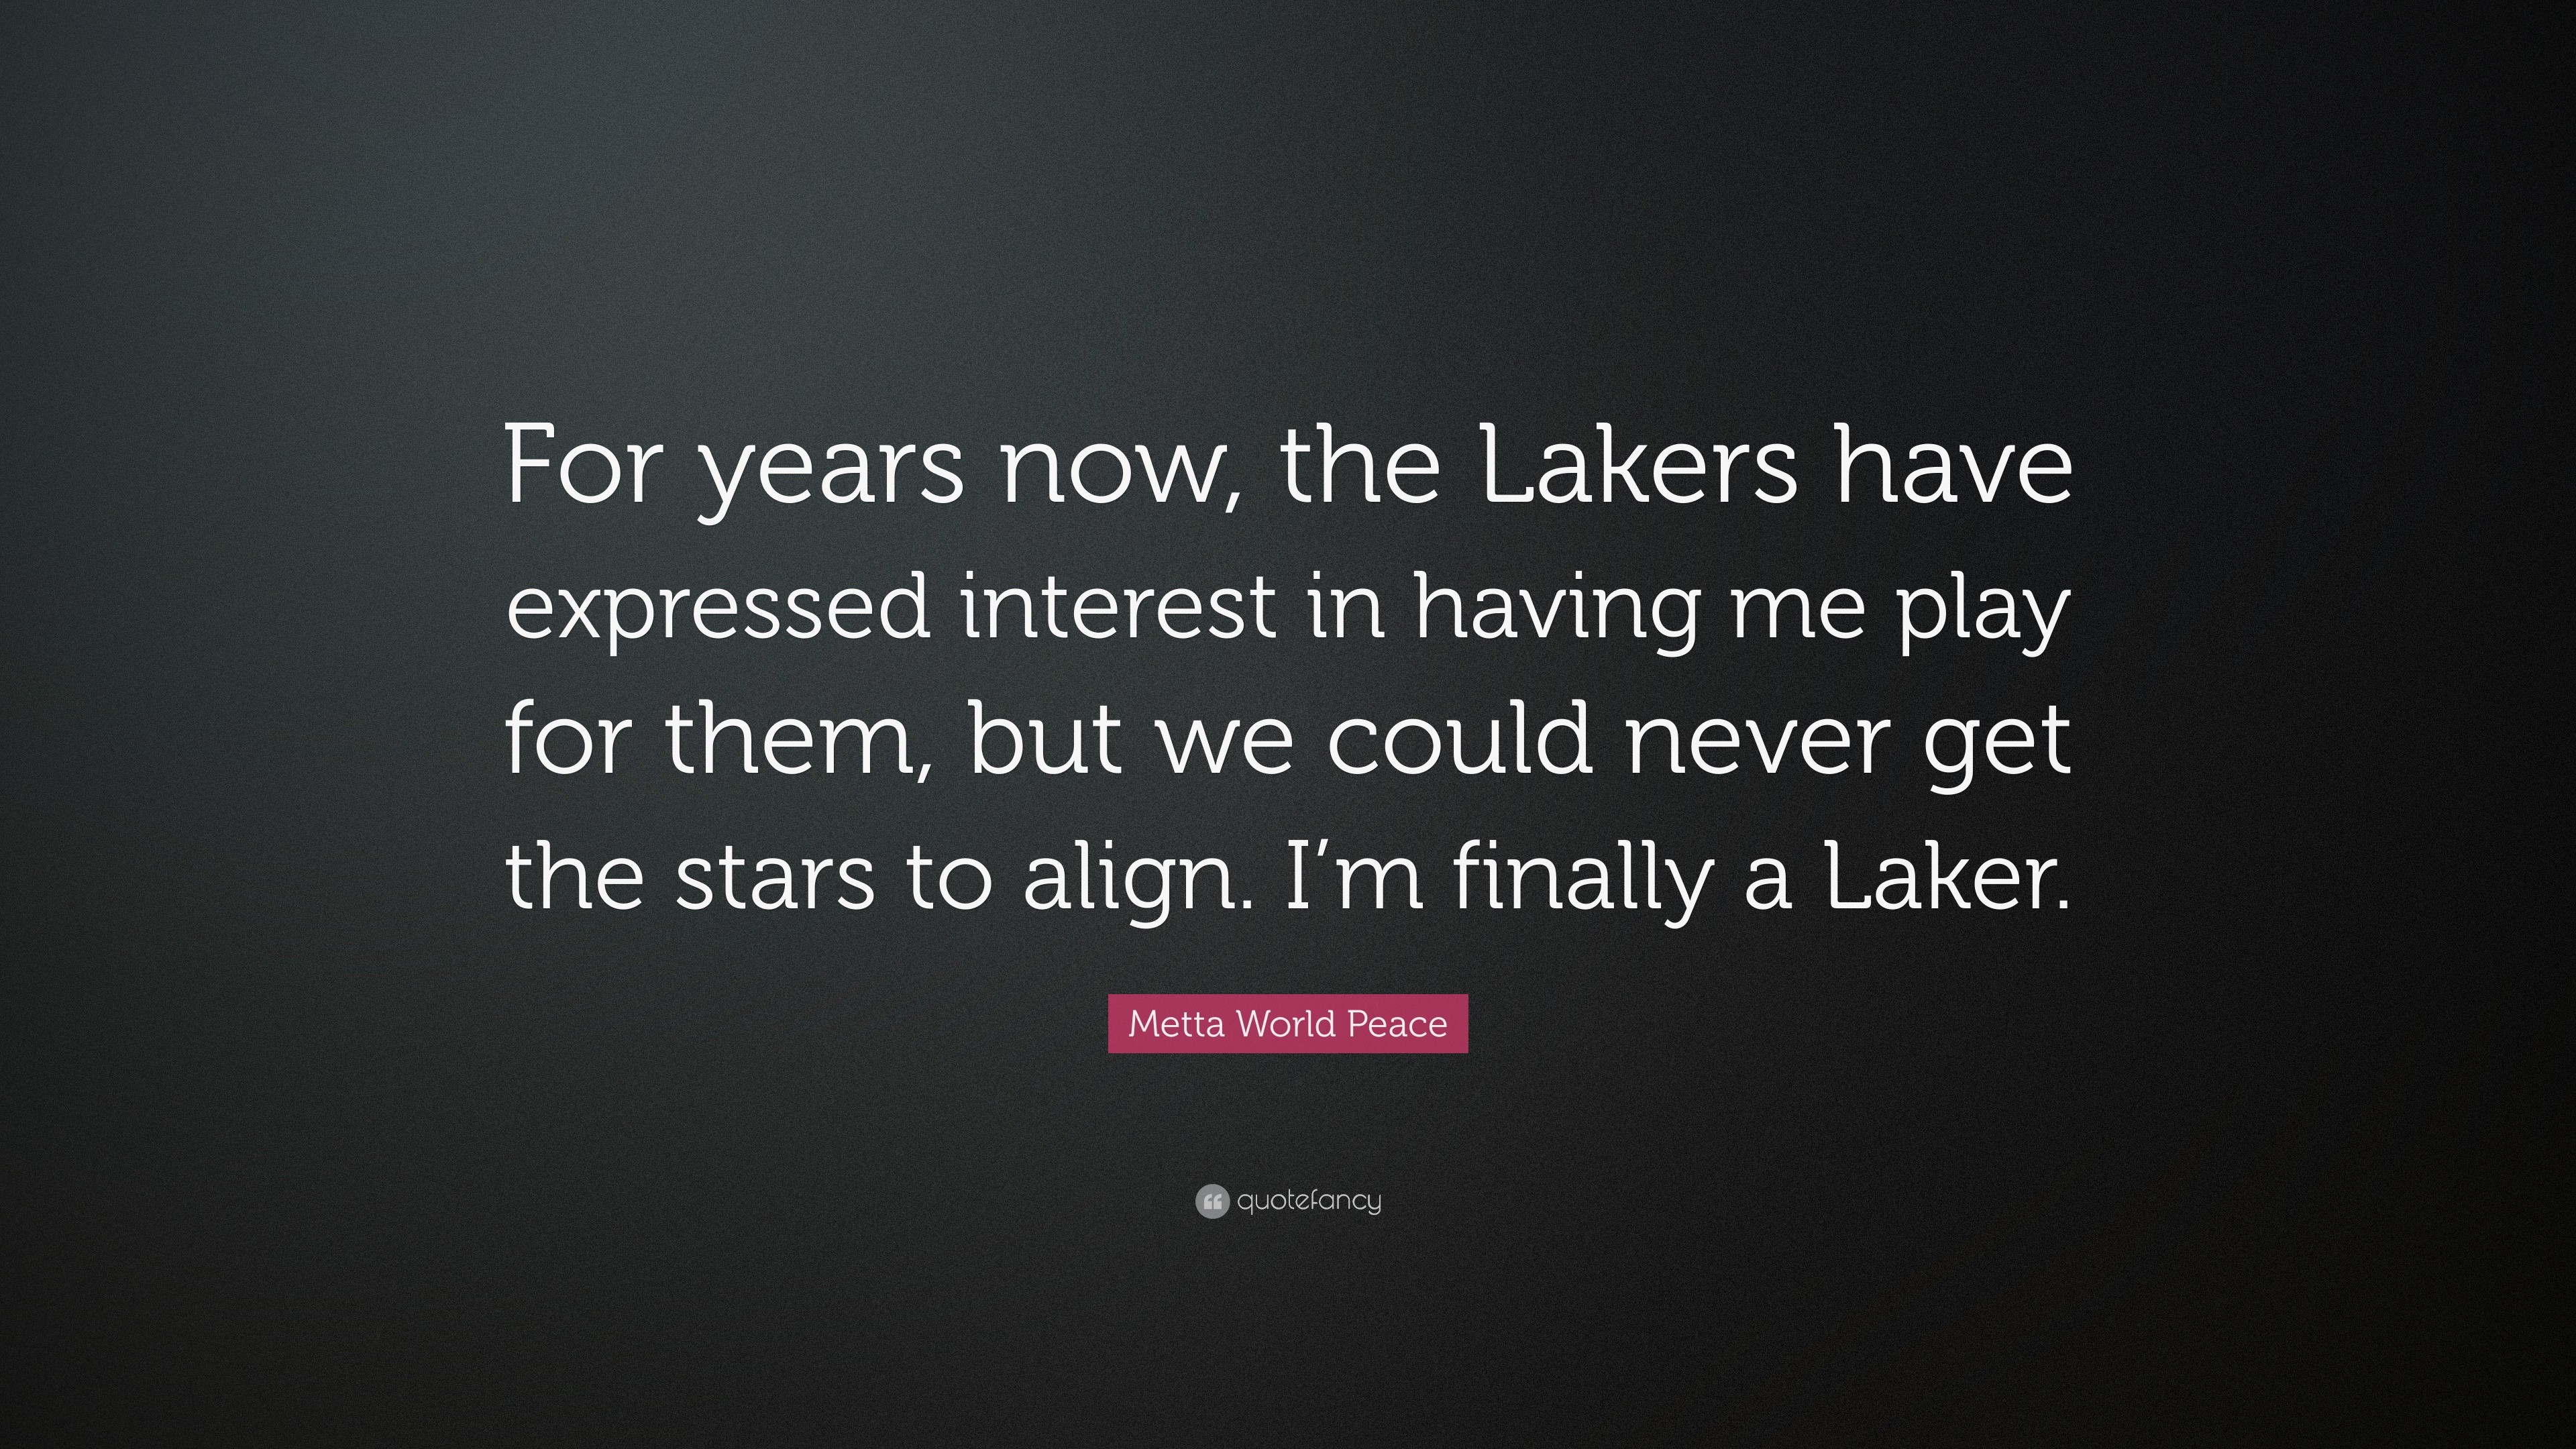 3840x2160 Metta World Peace Quote: “For years now, the Lakers have expressed interest  in